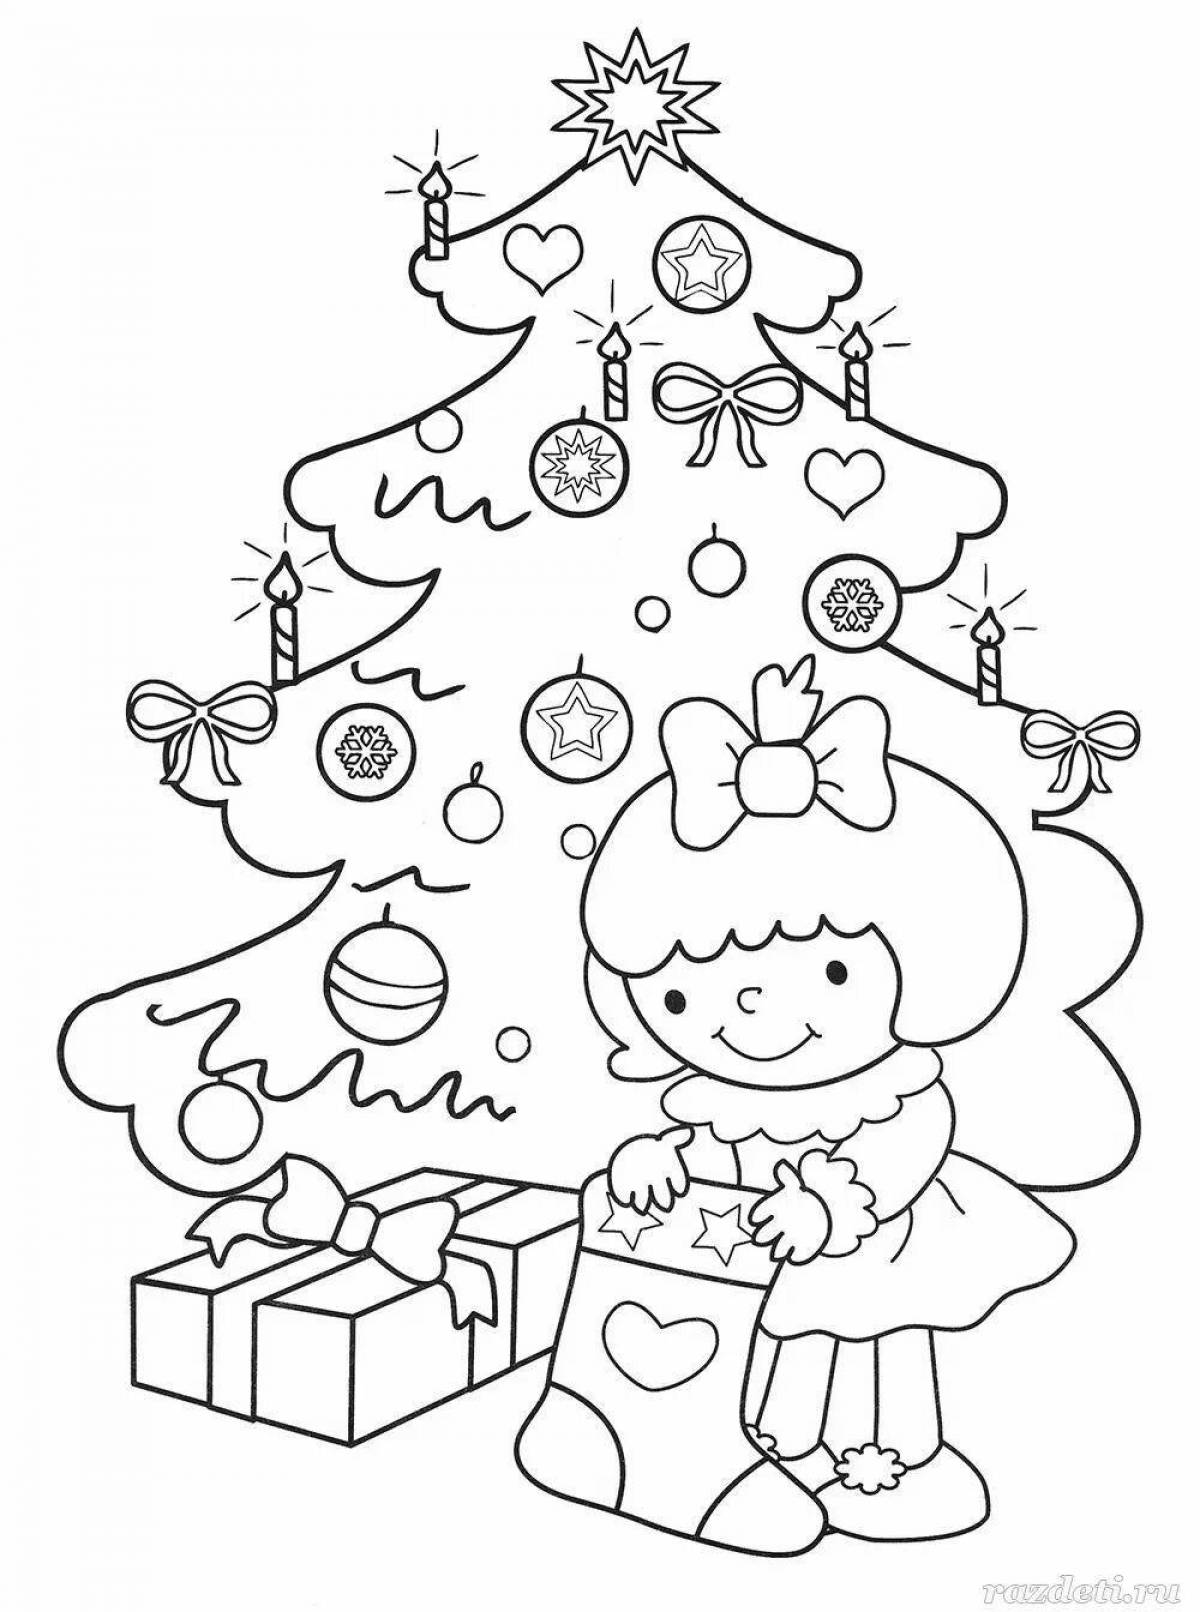 Wonderful Christmas tree coloring for kids